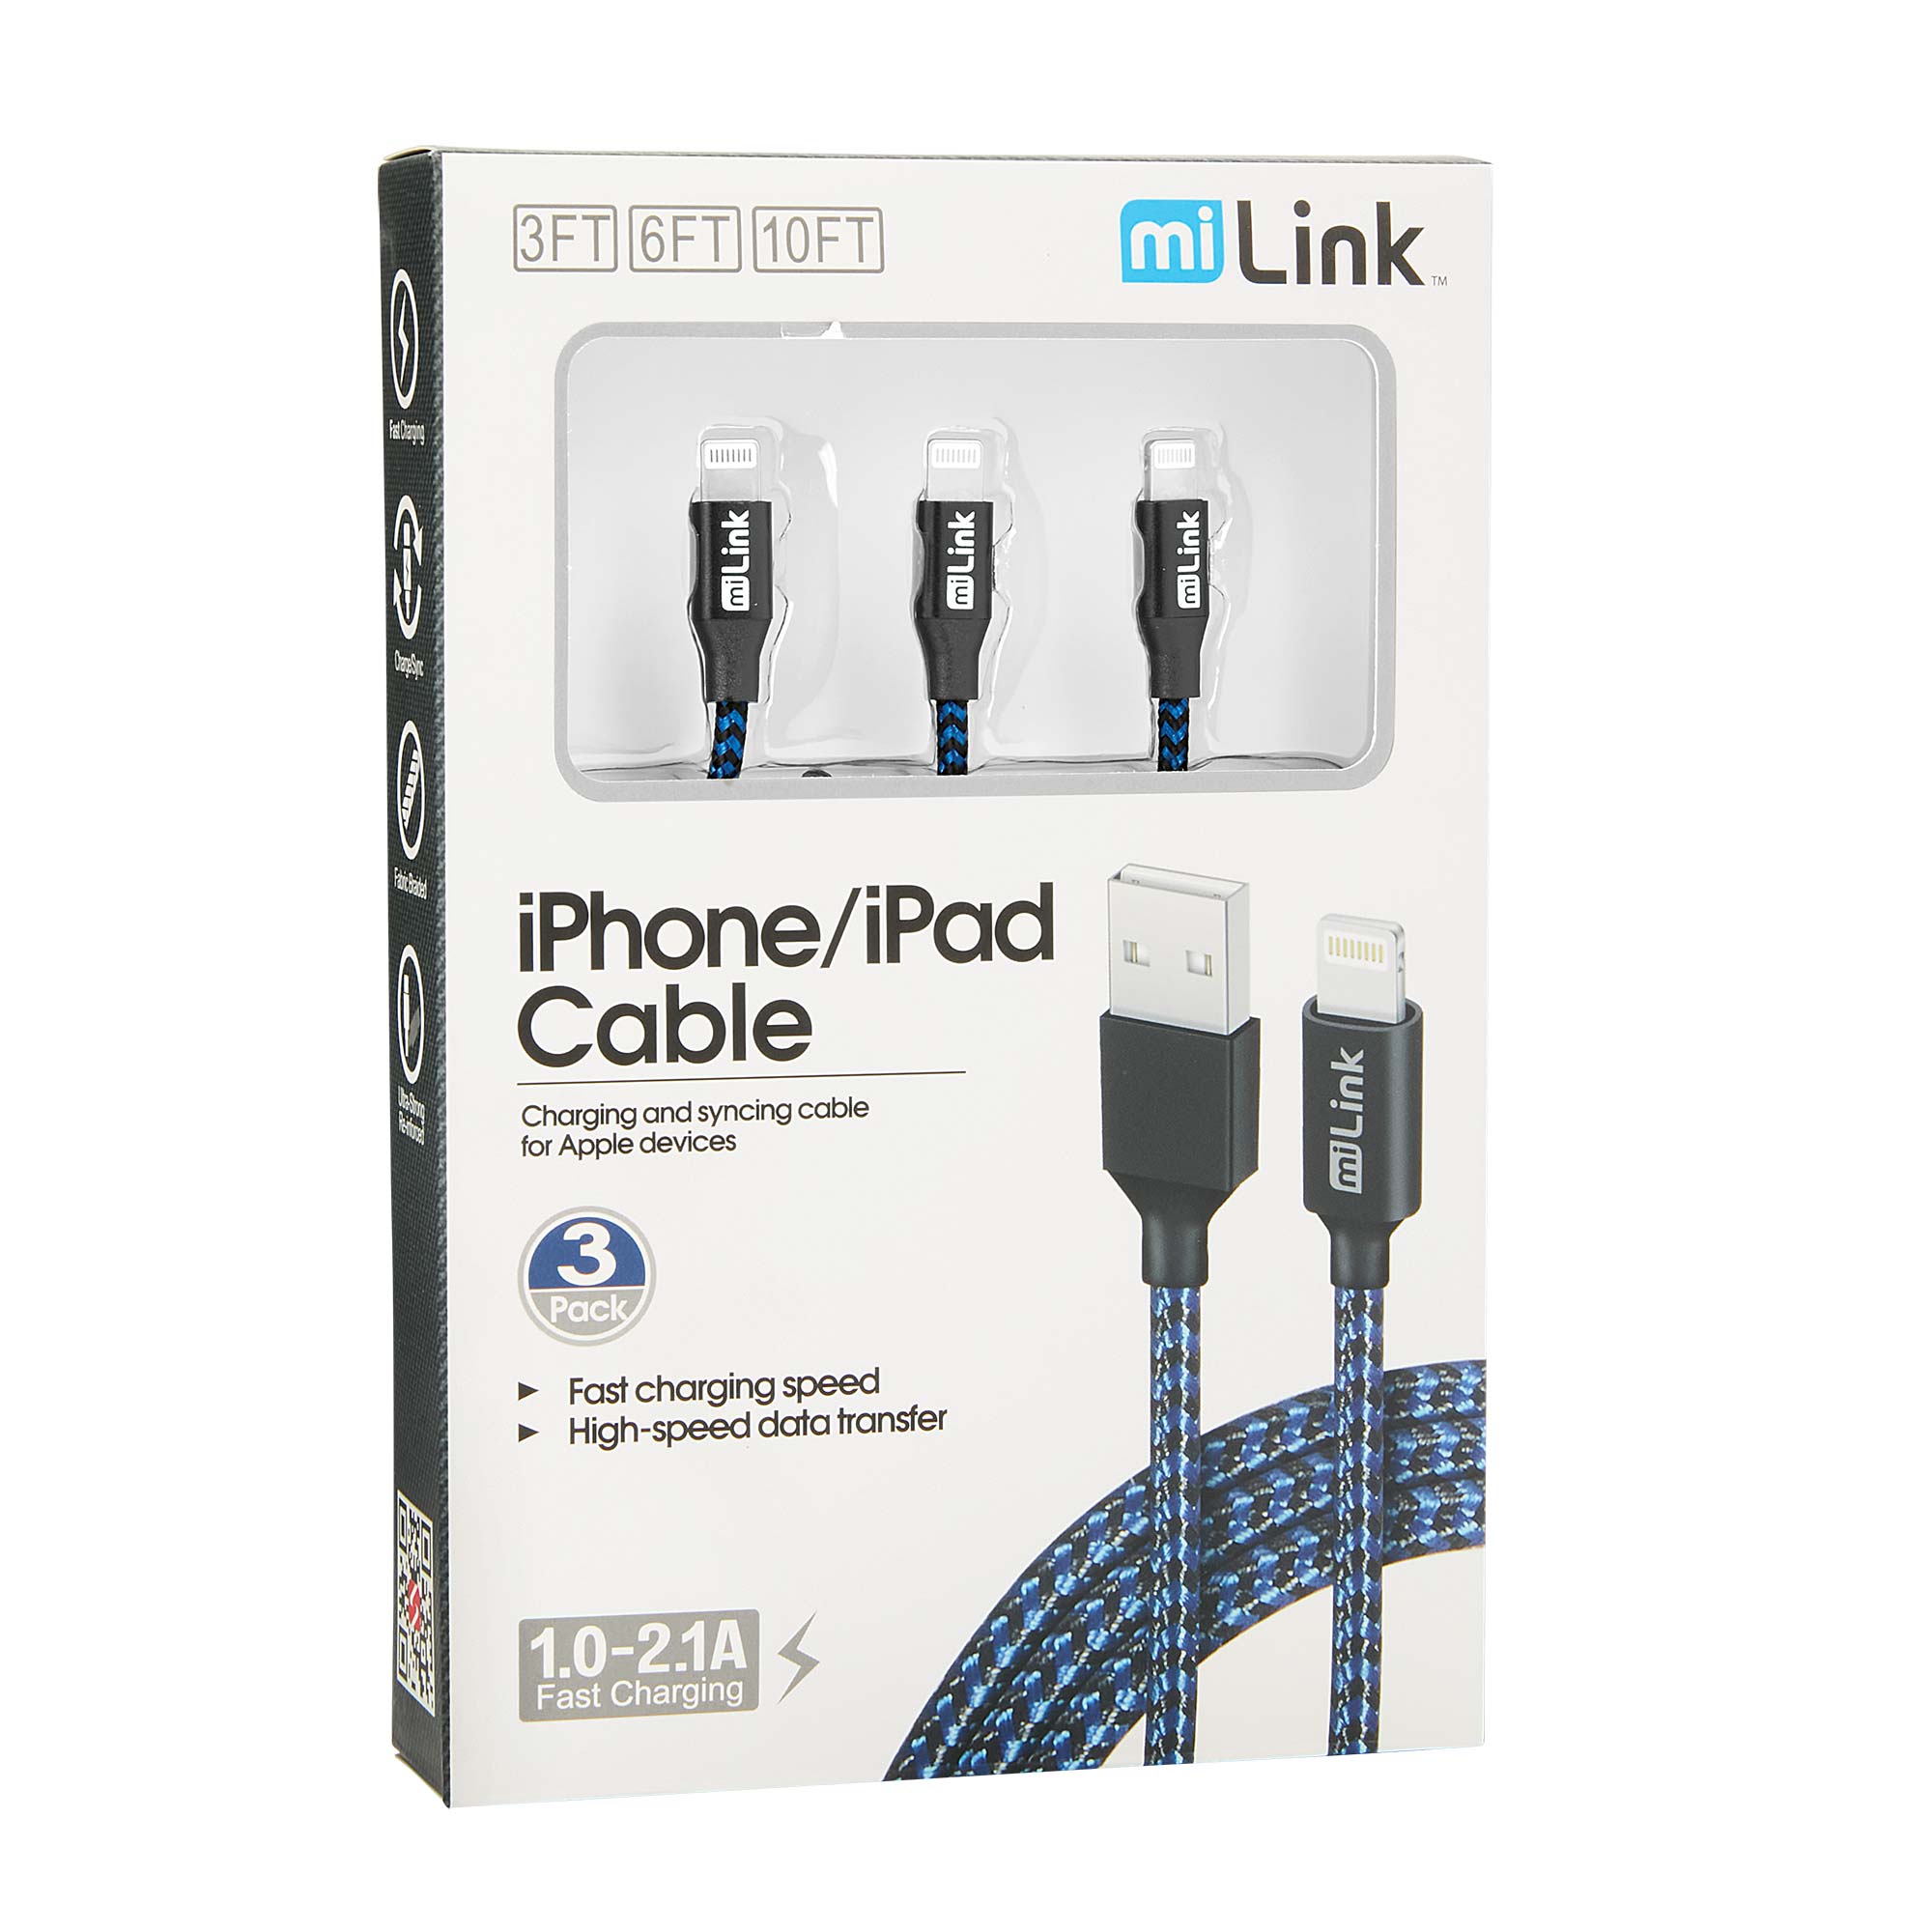 iPhone/iPad Lightning Cables - 3 Pack